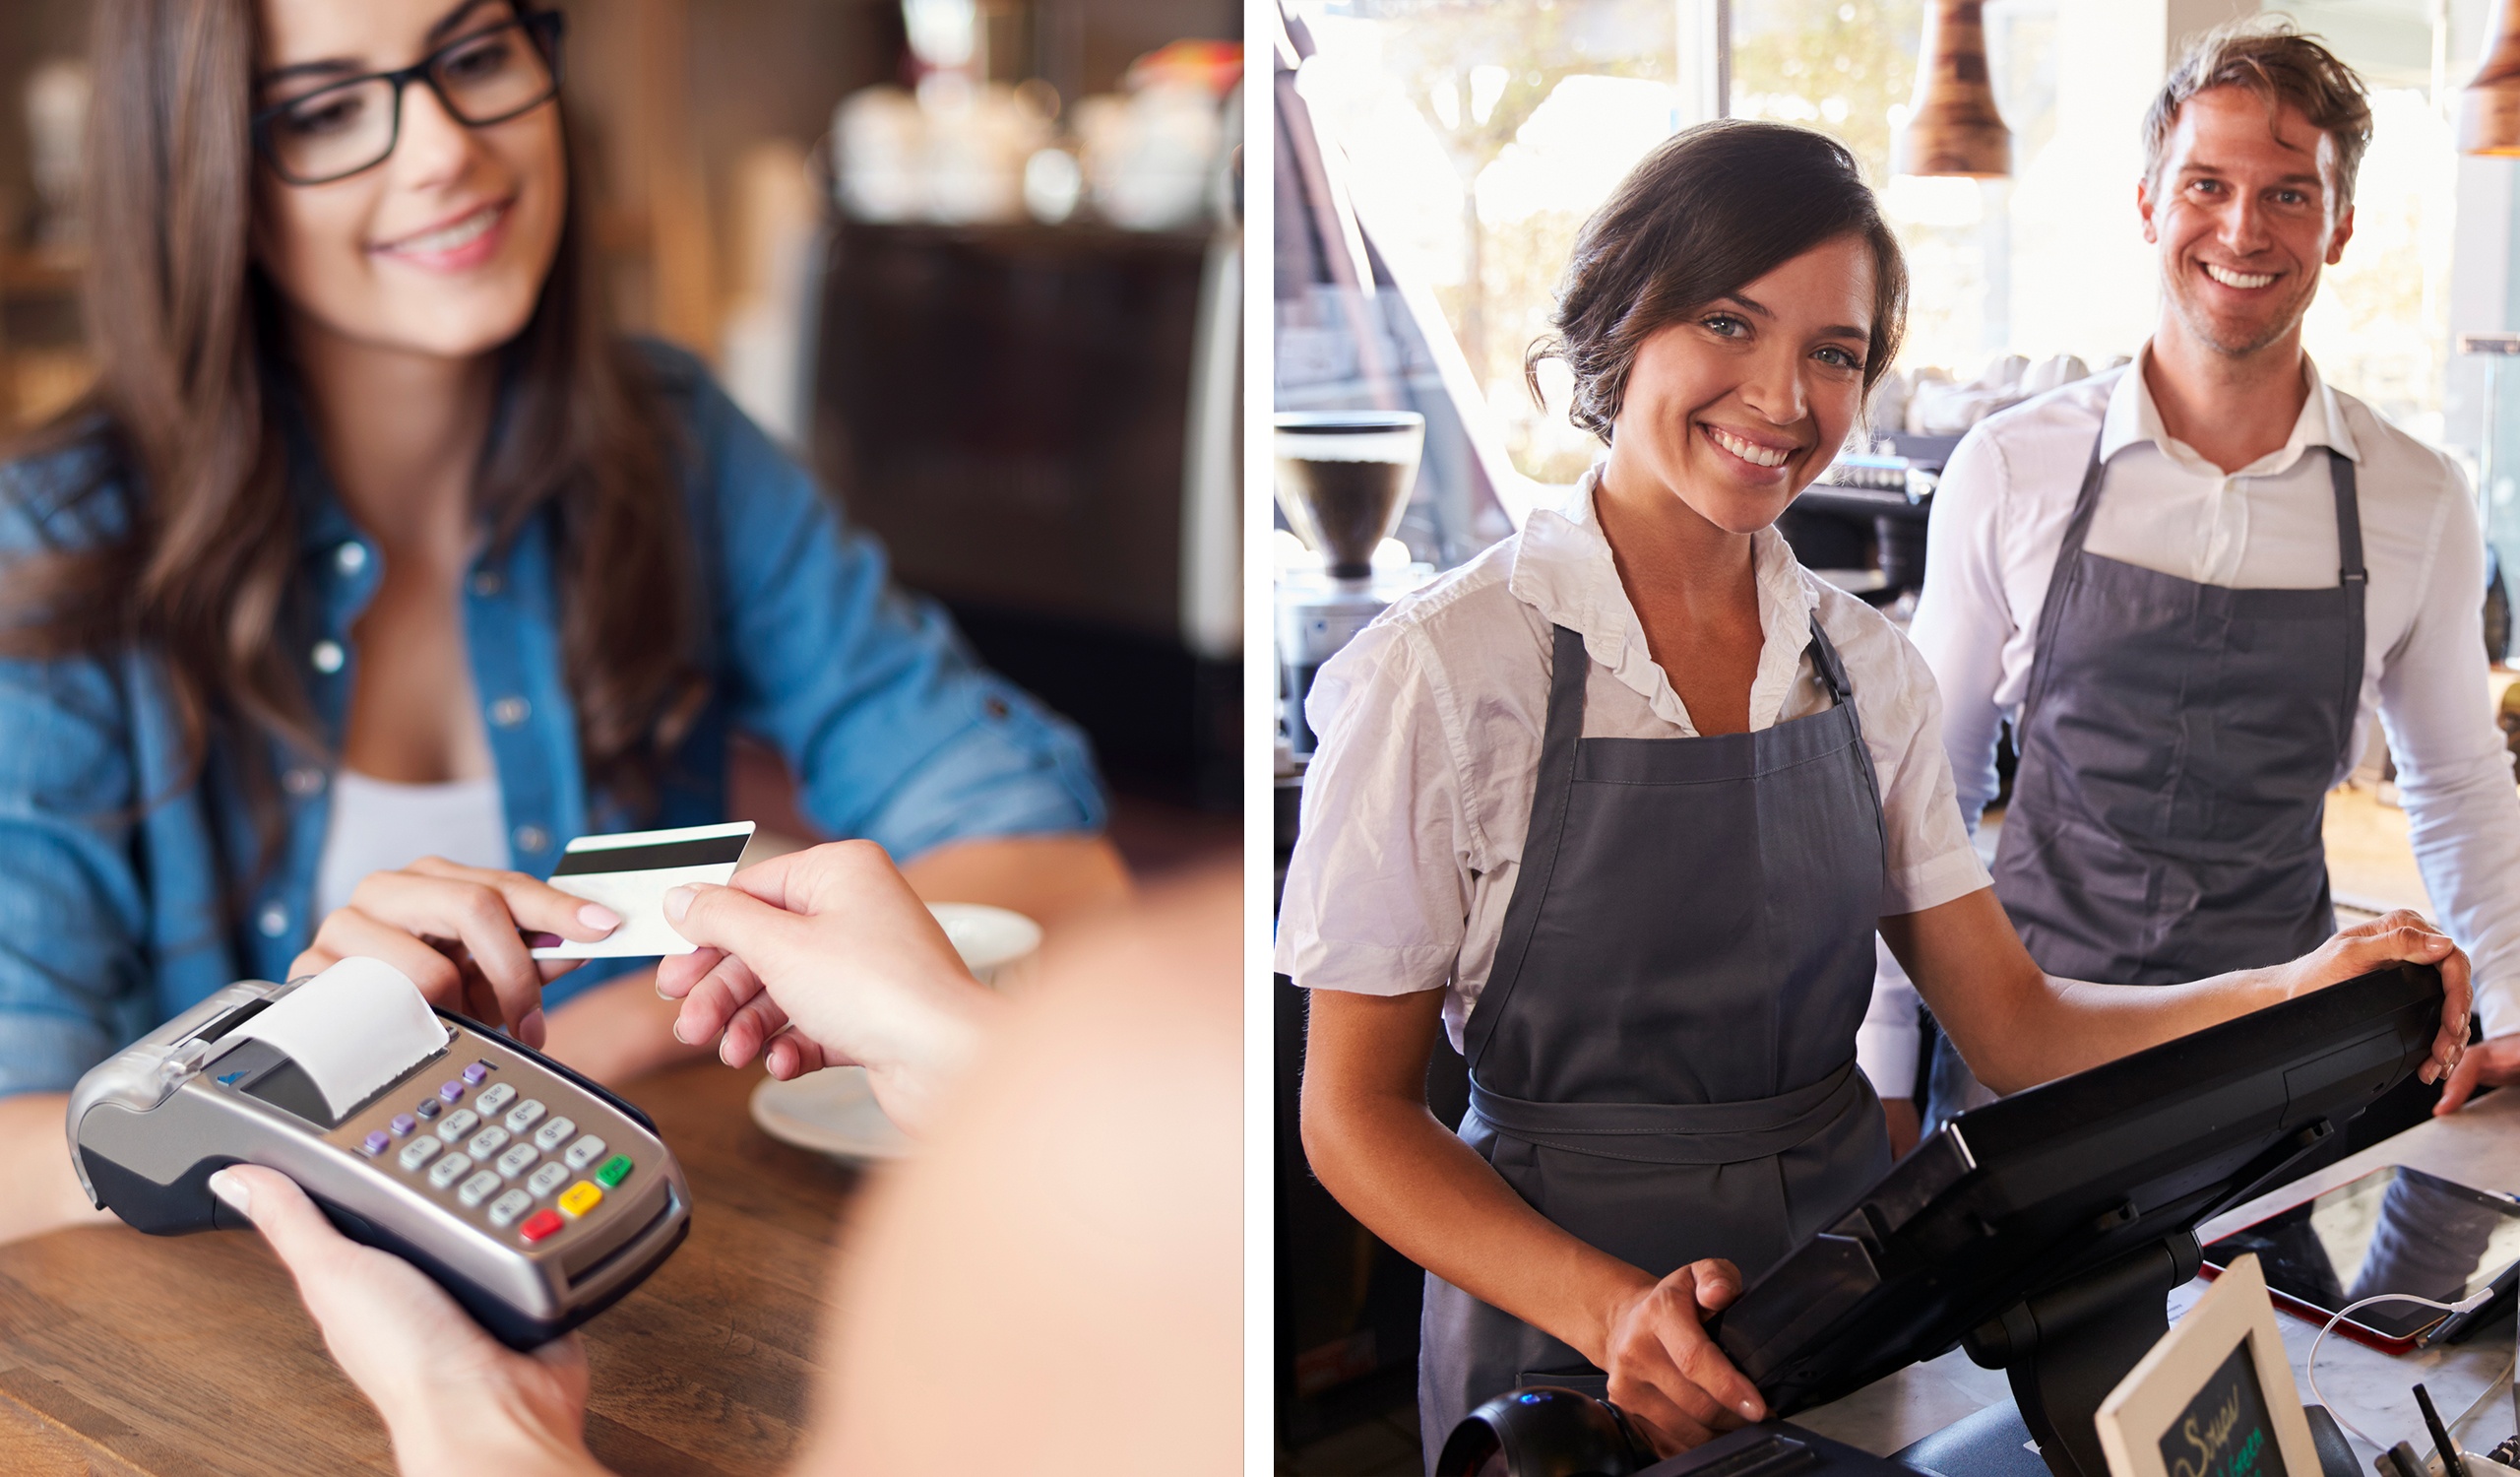 There are two images present. The left depicts a brunette woman with glasses in a blue button-down shirt giving her credit card to a cashier with a credit card reader. On the right, two cashiers in gray aprons stand smiling.